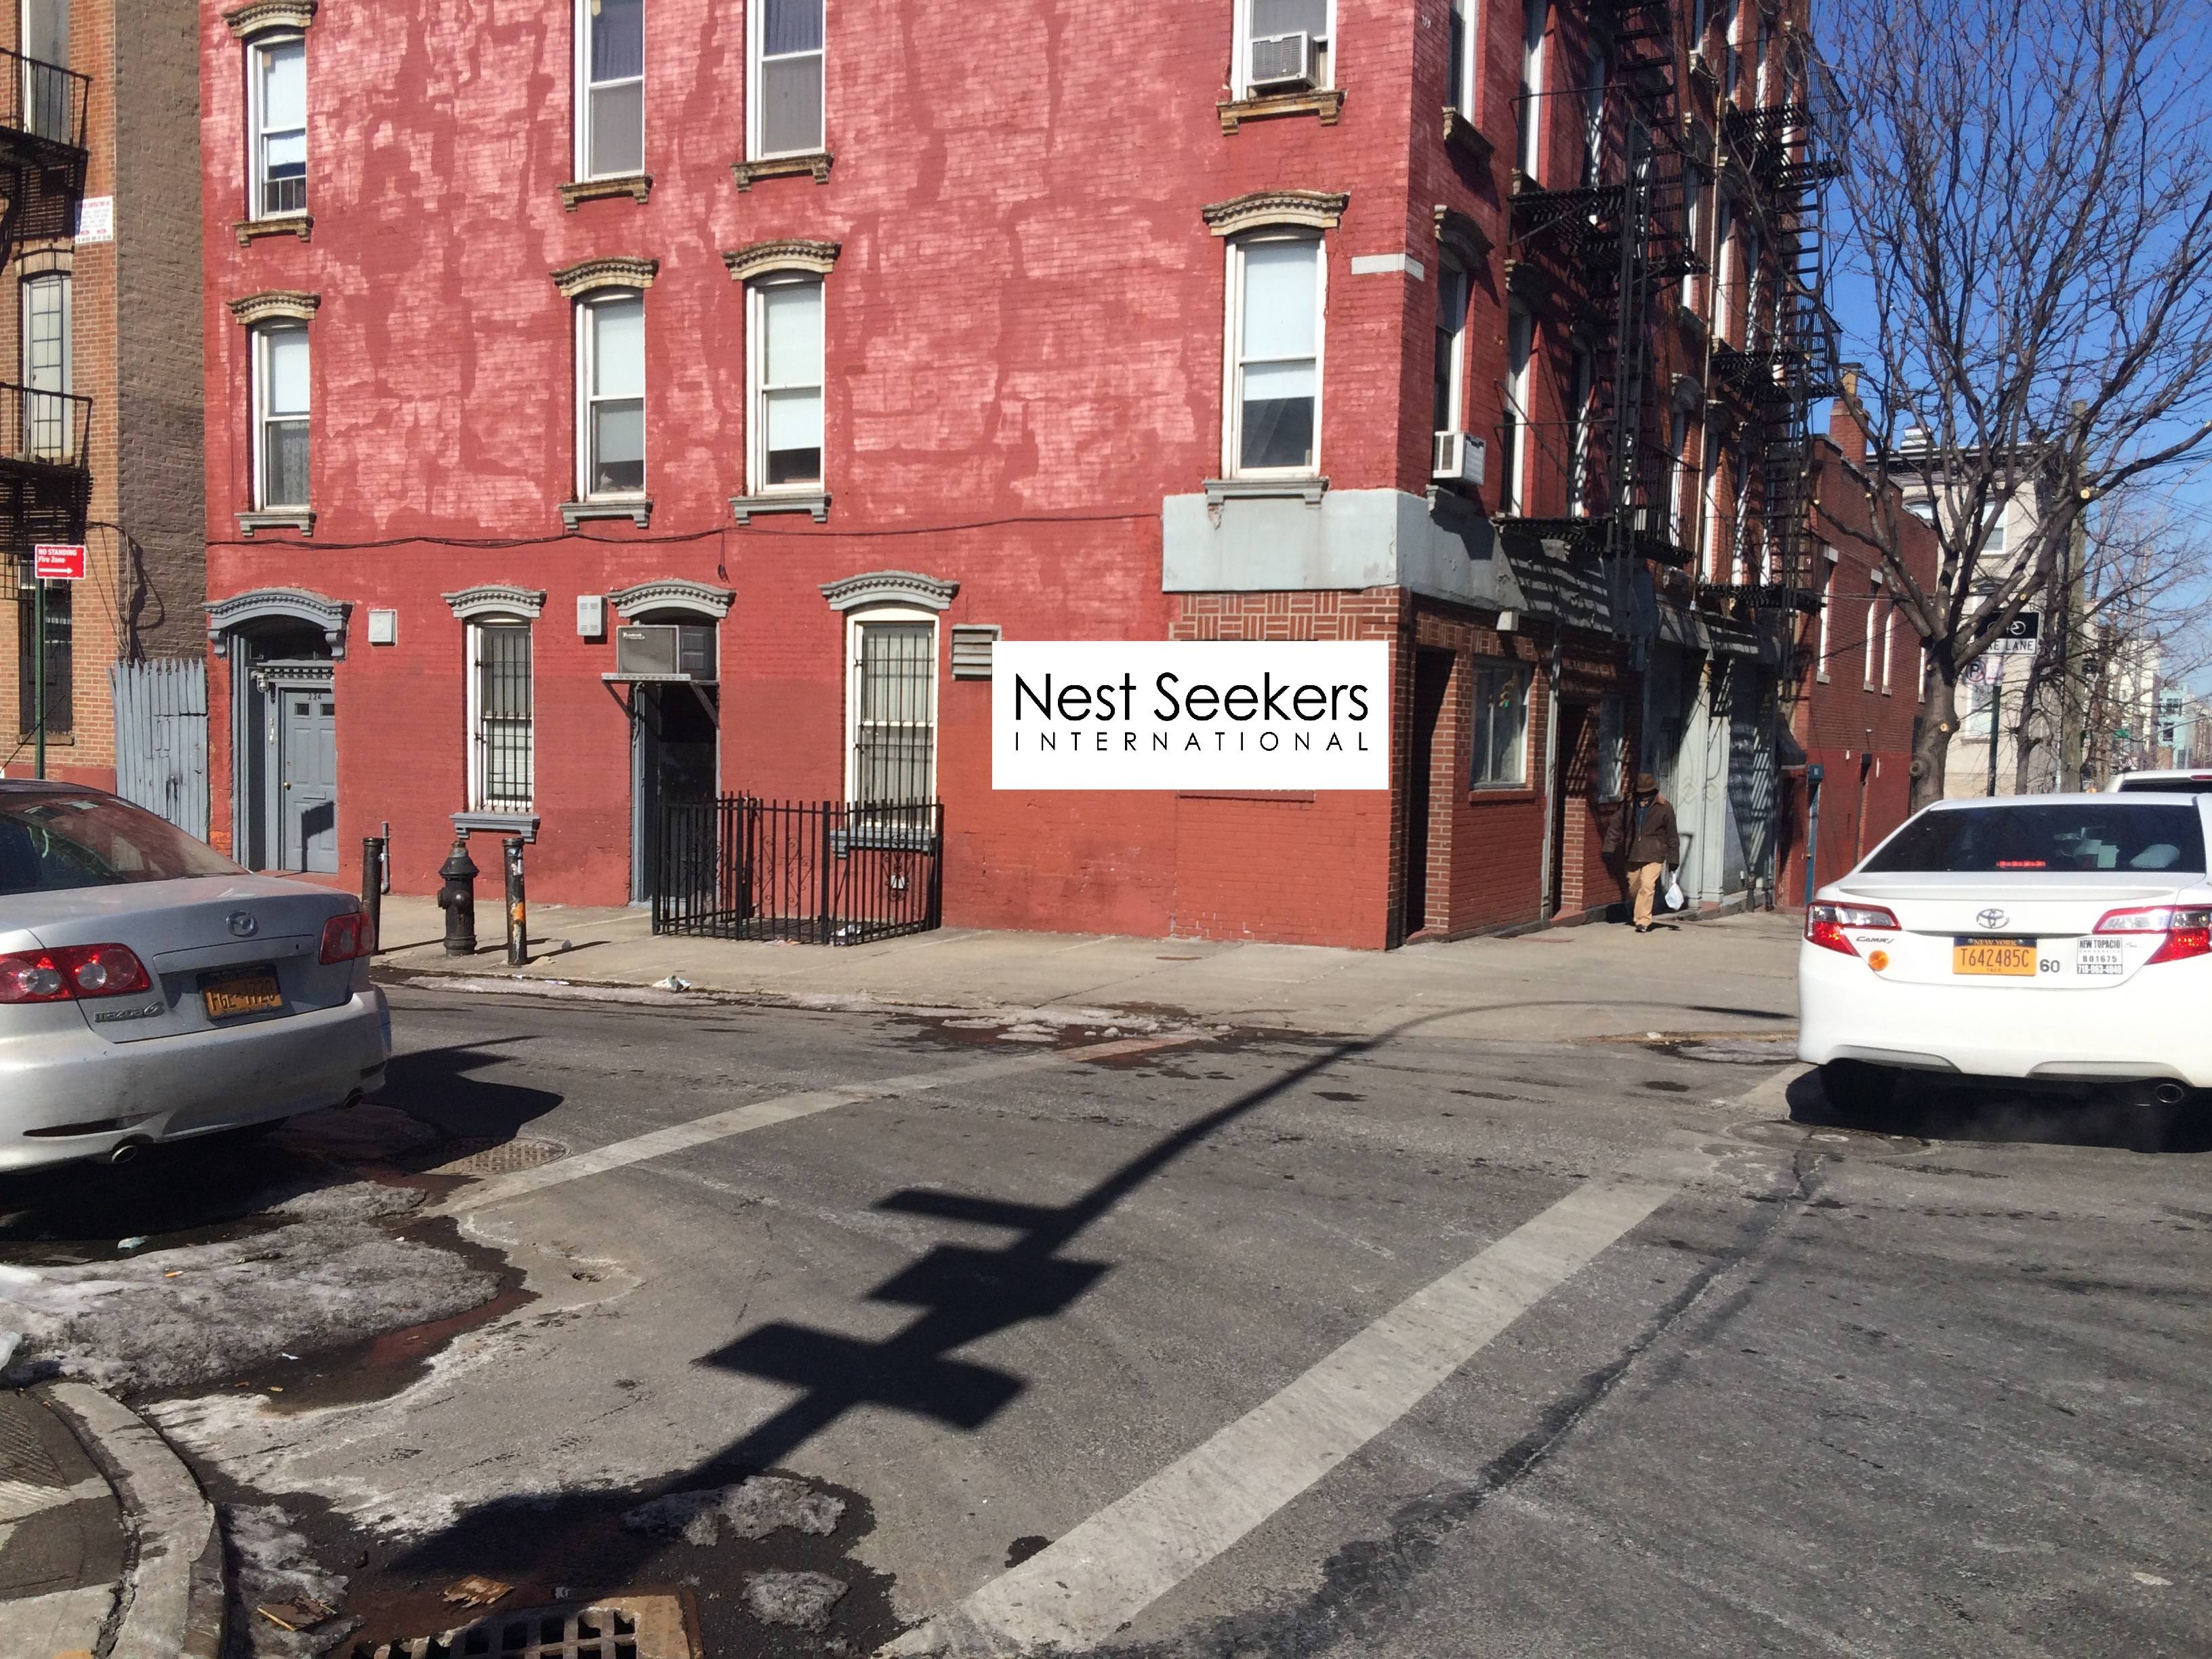 Corner Retail Space - North Williamsburg, One Block from Bedford Ave